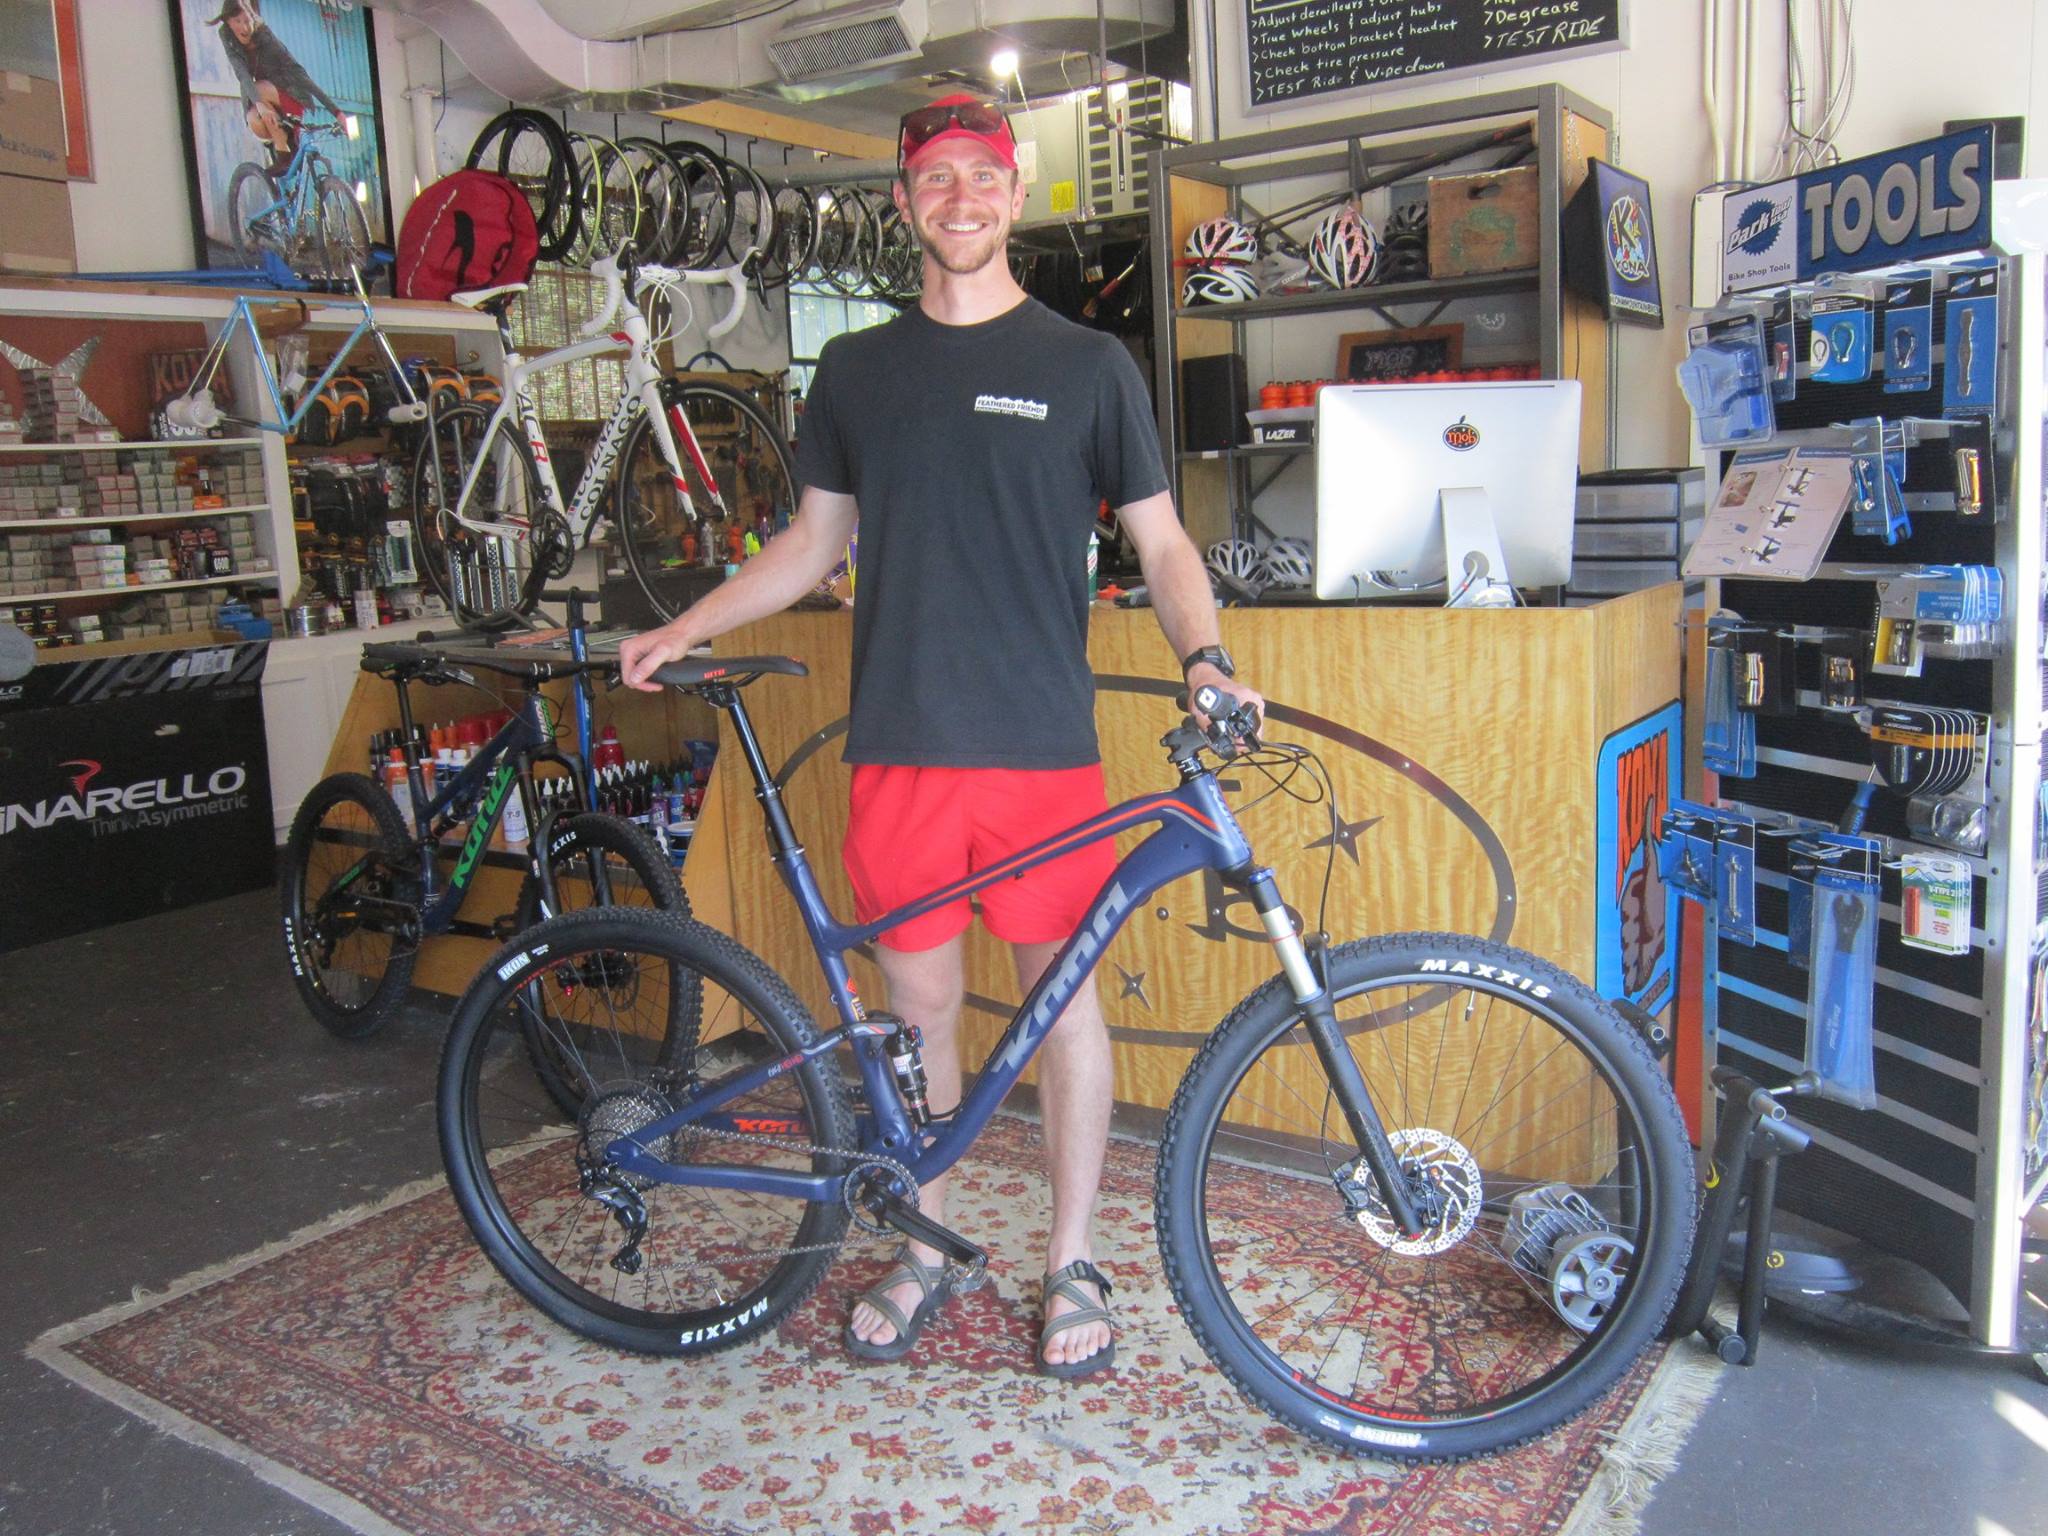 Ben with his new Kona Hei Hei. He left the shop and headed straight for some fun single track with his new Kona Bicycle. Looking Good!